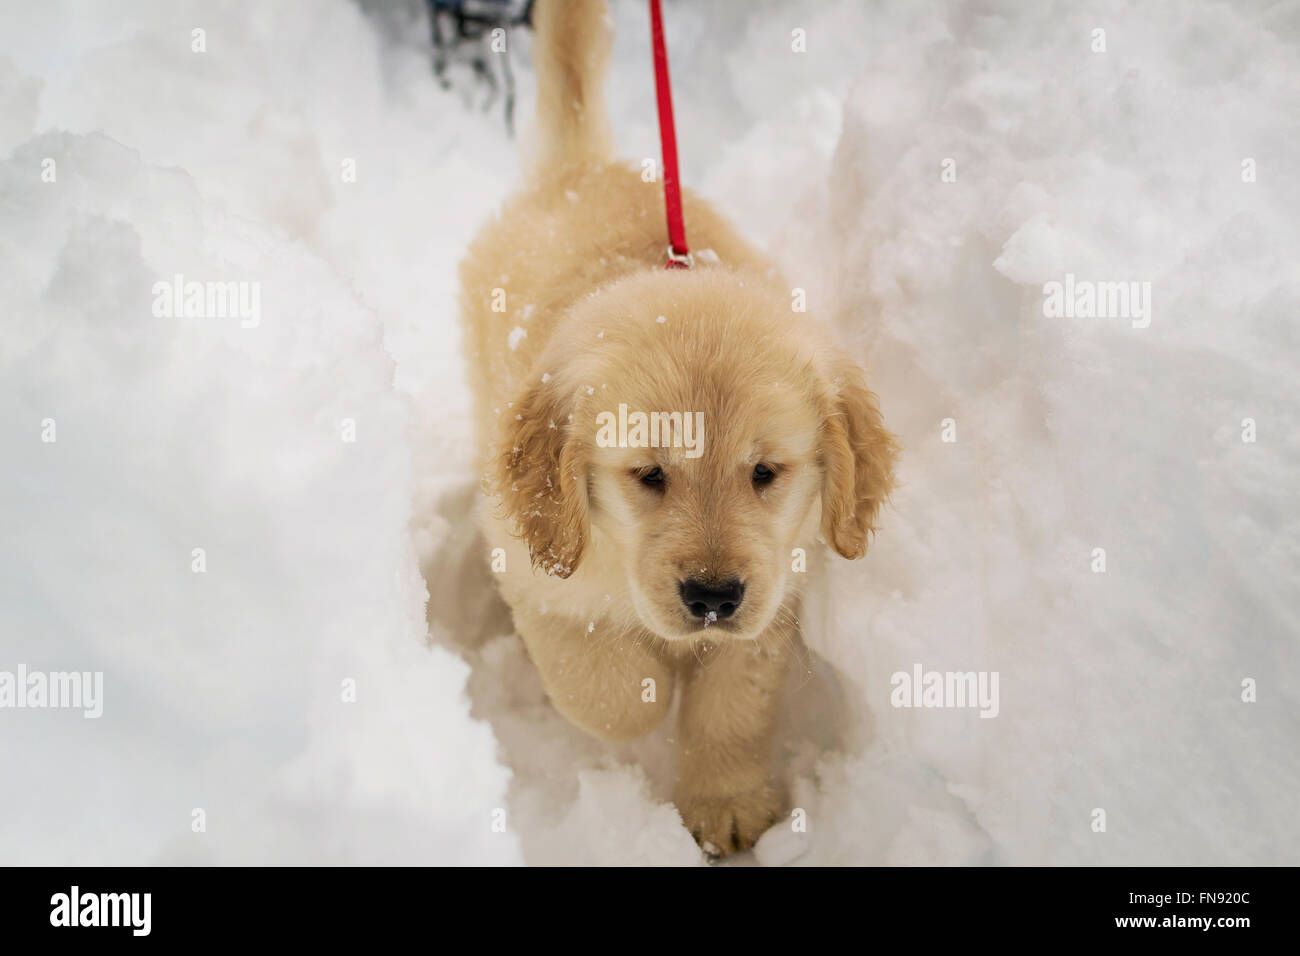 Chiot golden retriever dog walking in snow Banque D'Images